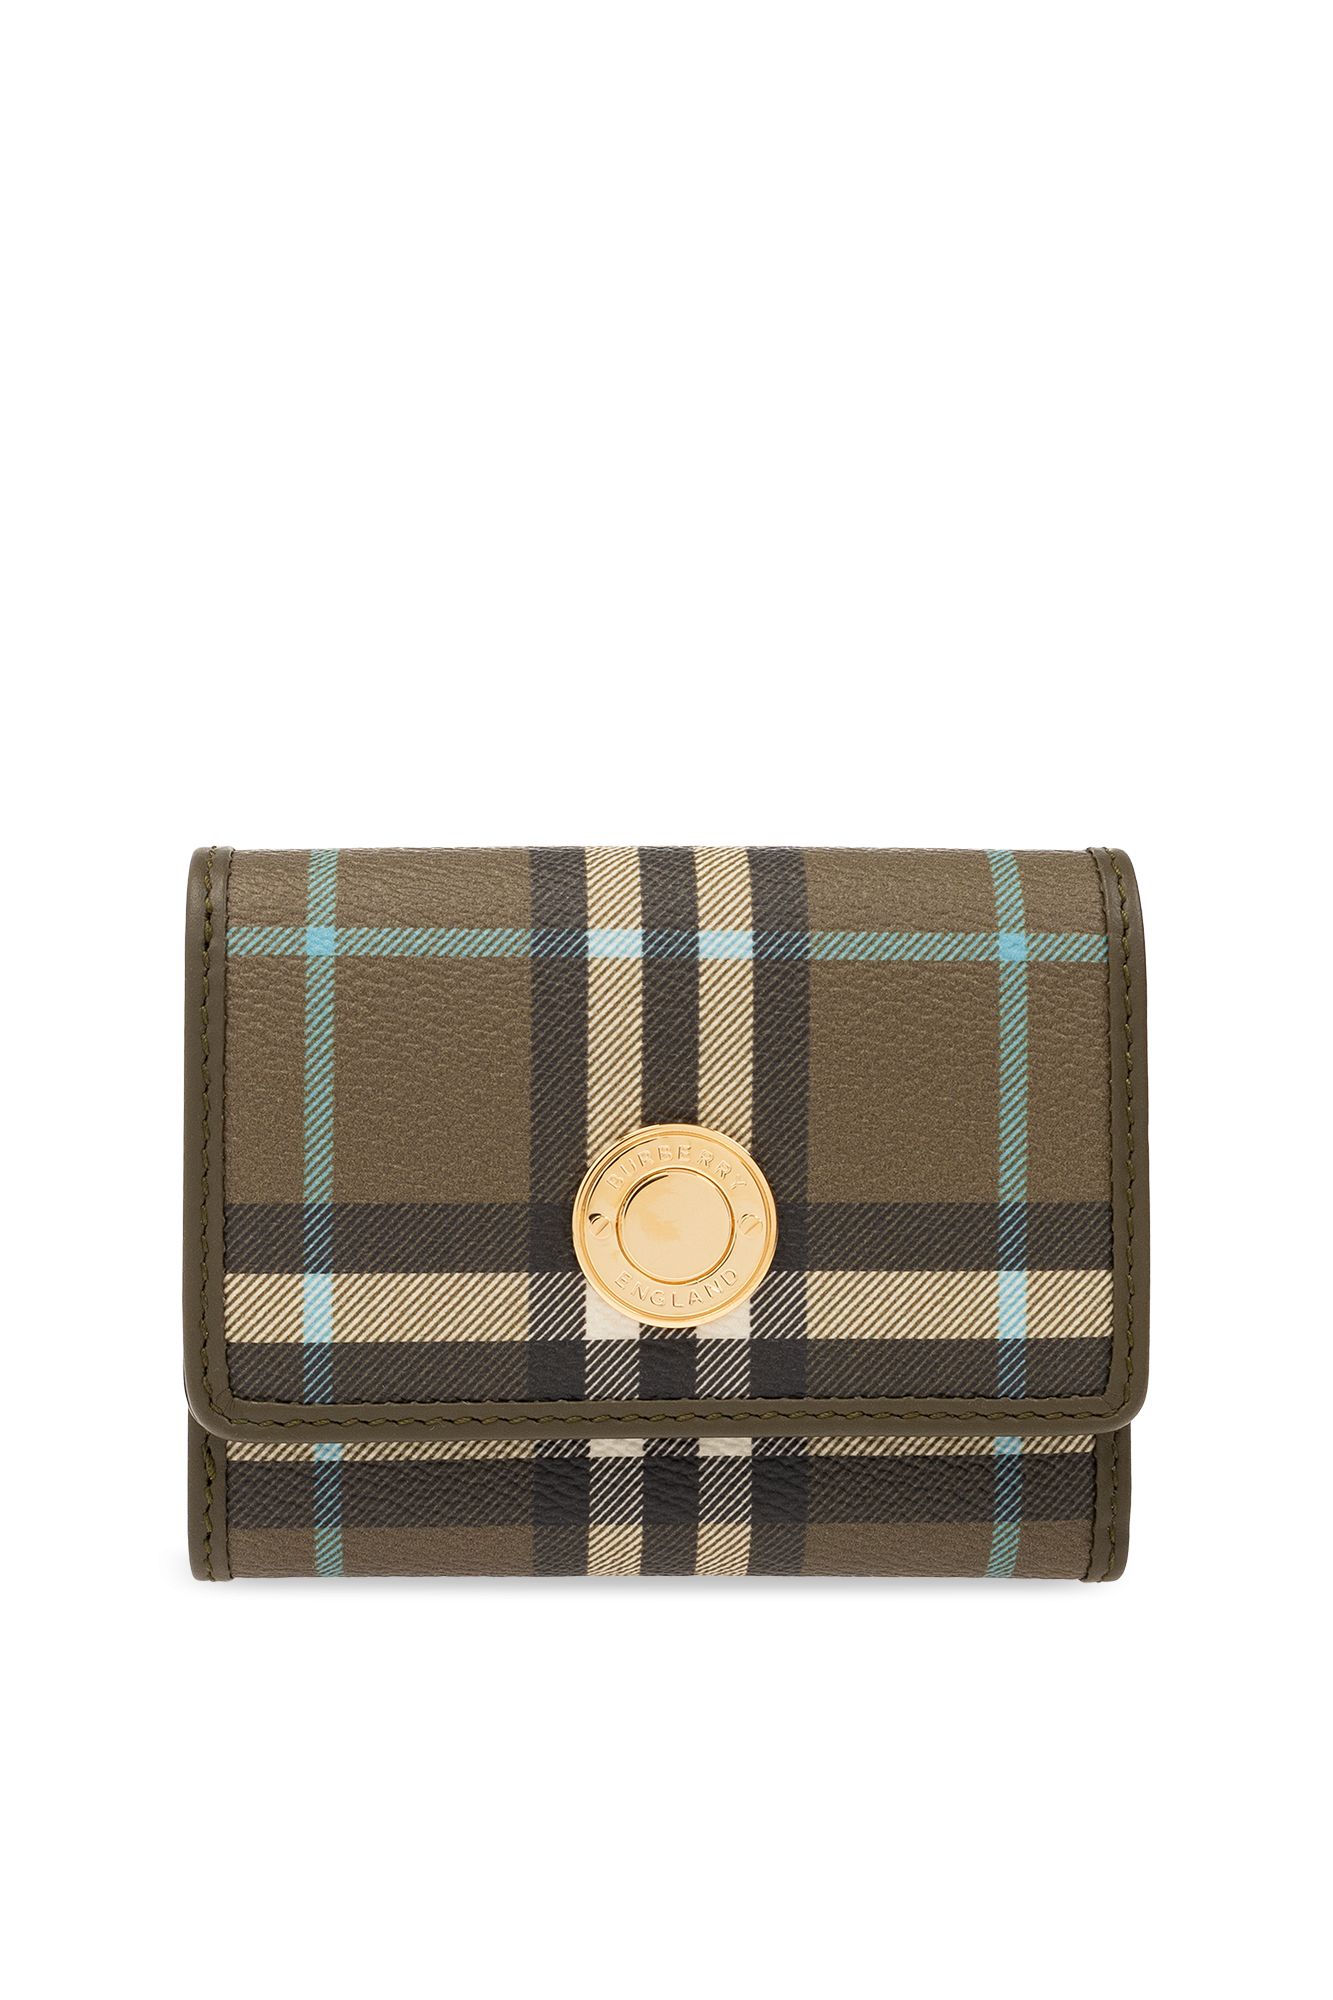 Burberry Man and Woman's Leather Wallet